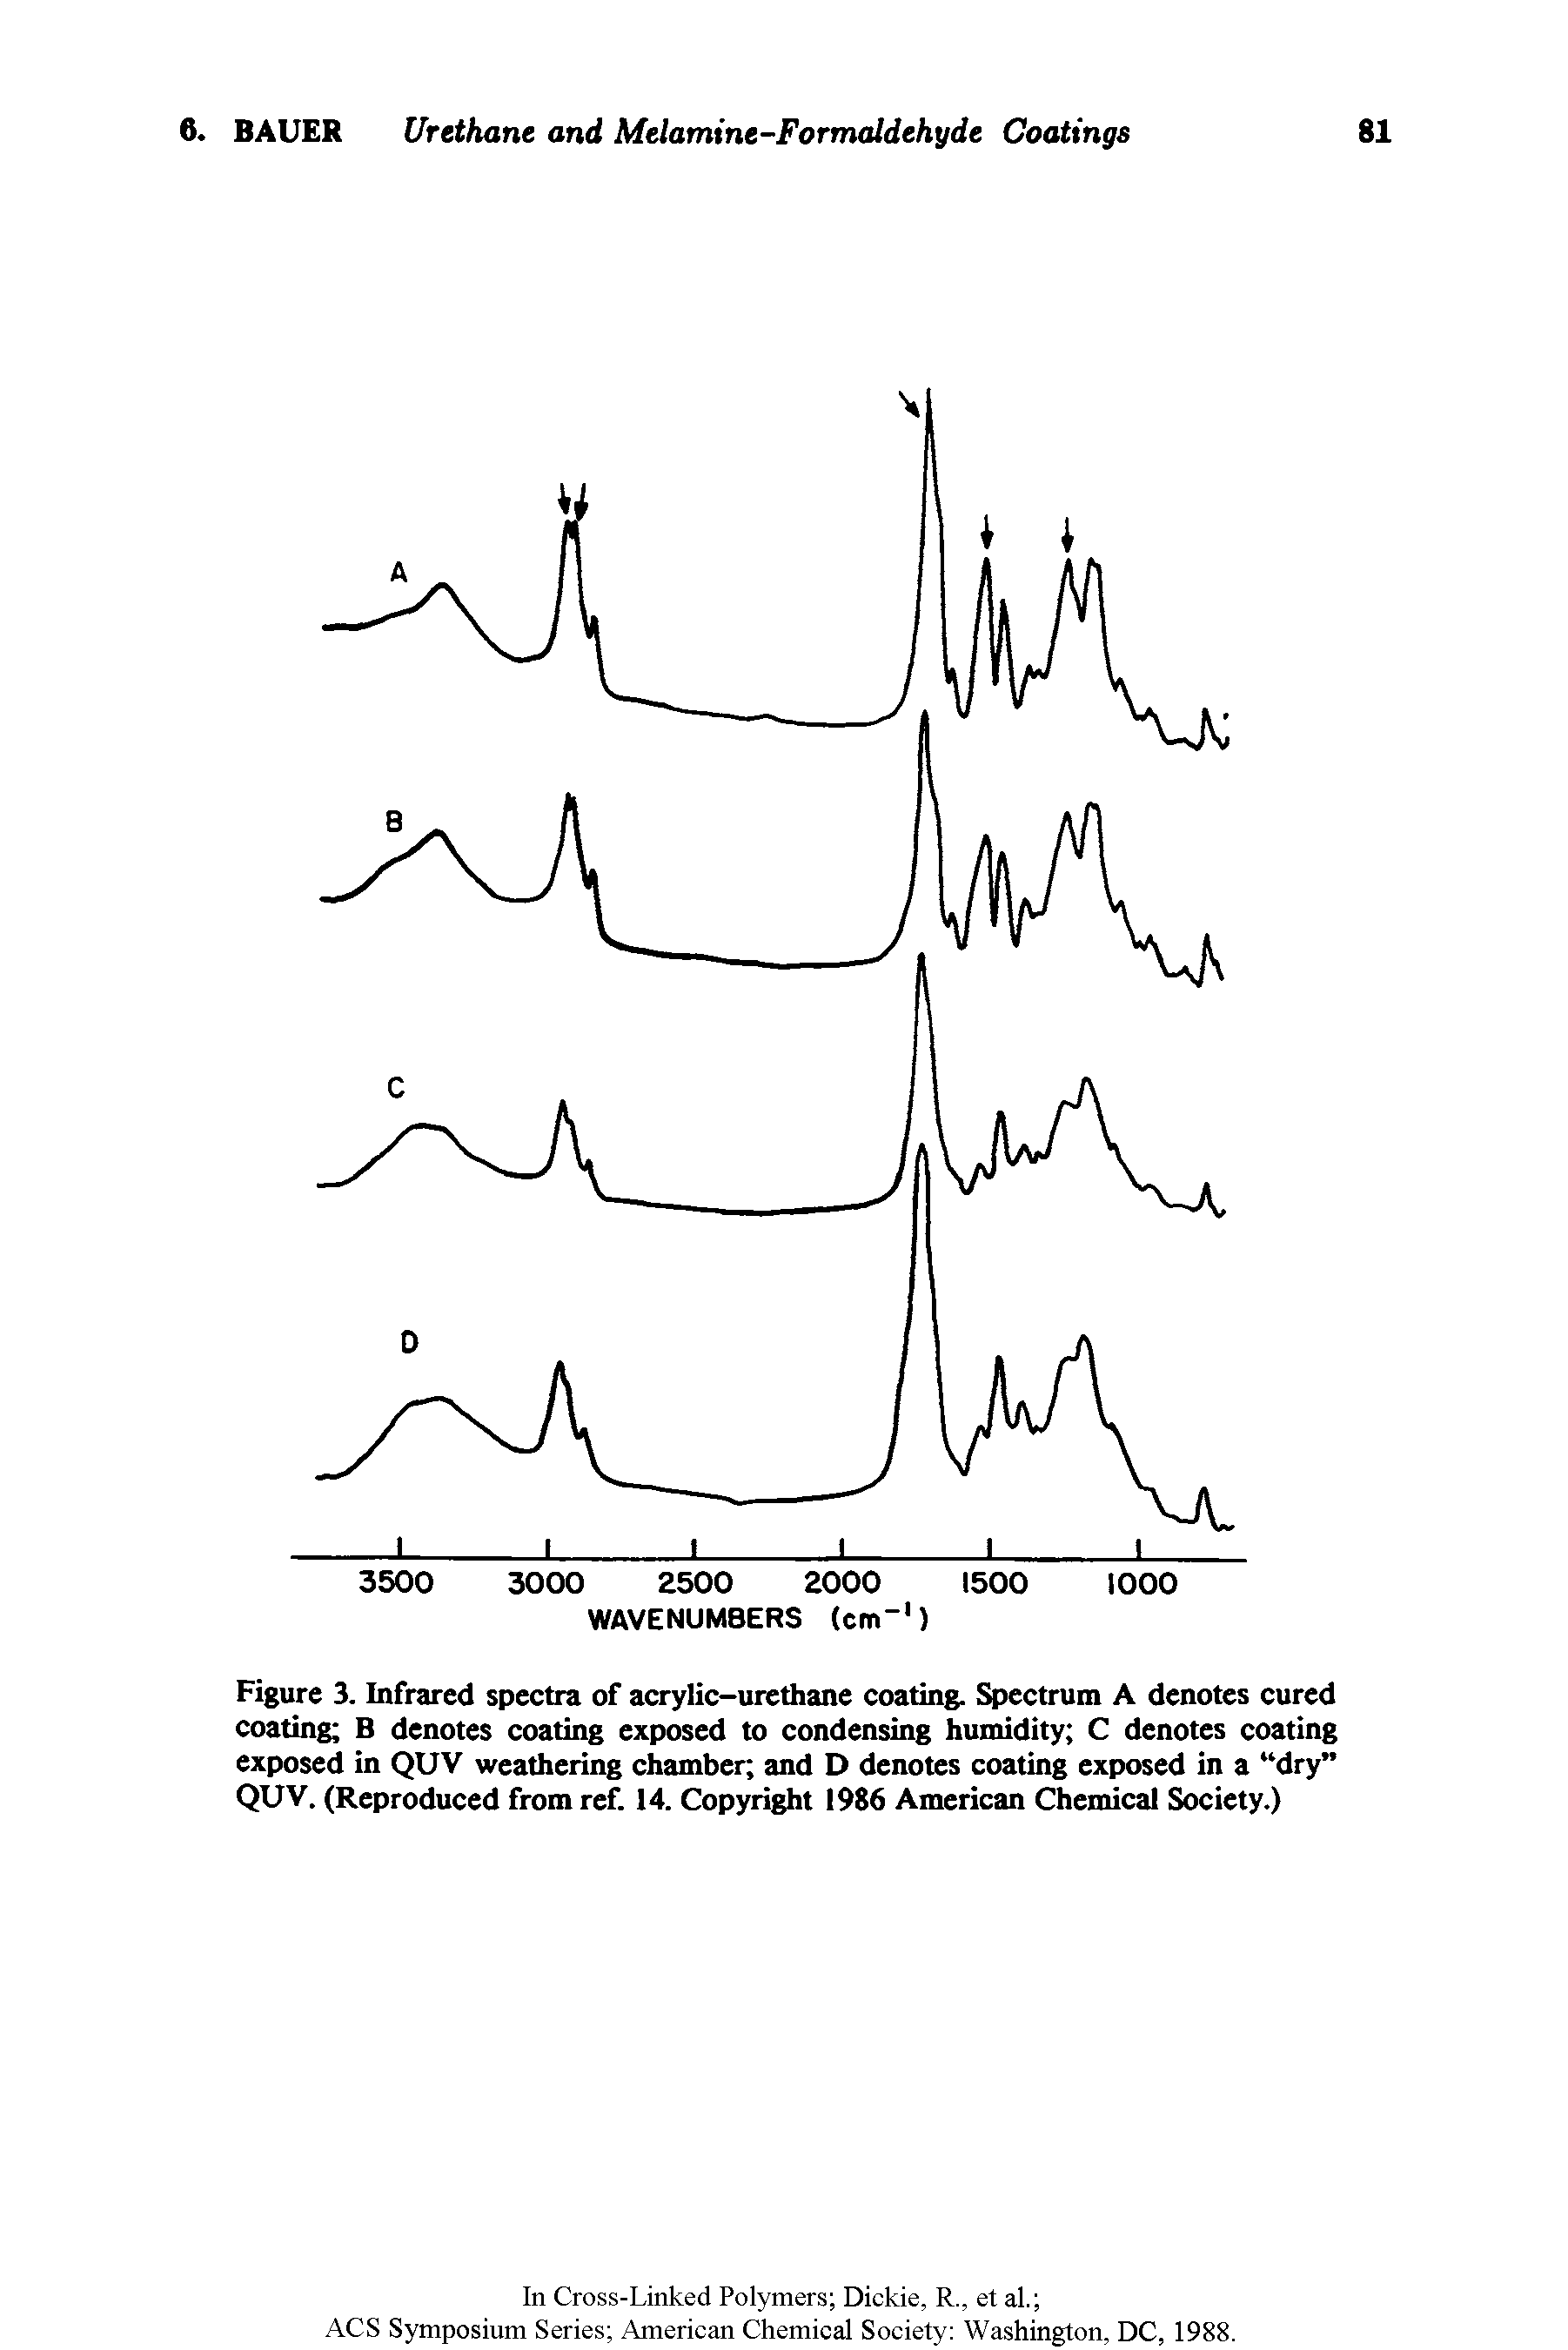 Figure 3. Infrared spectra of acrylic-urethane coating. Spectrum A denotes cured coating B denotes coating exposed to condensing humidity C denotes coating exposed in QUV weathering chamber and D denotes coating exposed in a dry QUV. (Reproduced from ref. 14. Copyright 1986 American Chemical Society.)...